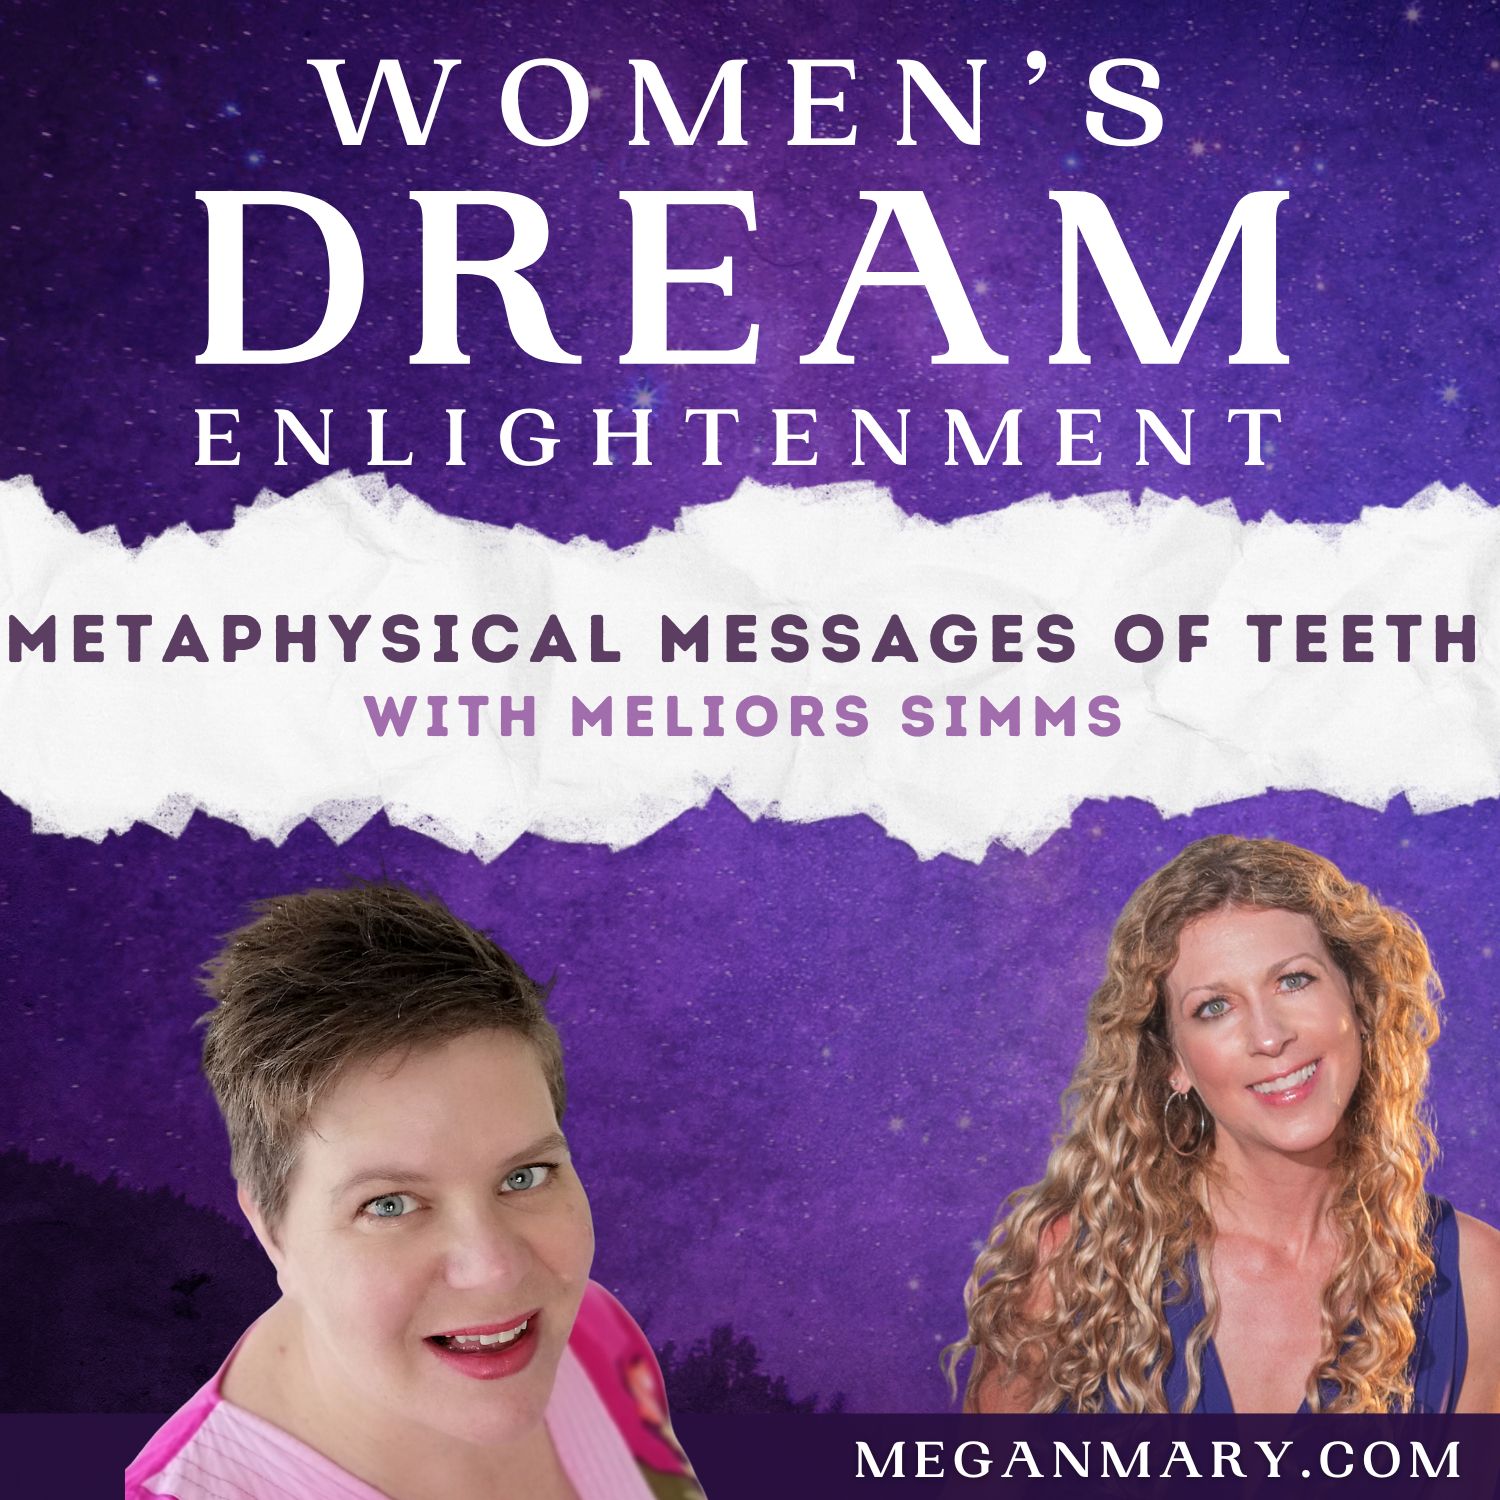 The Metaphysical Messages of Teeth with Meliors Simms